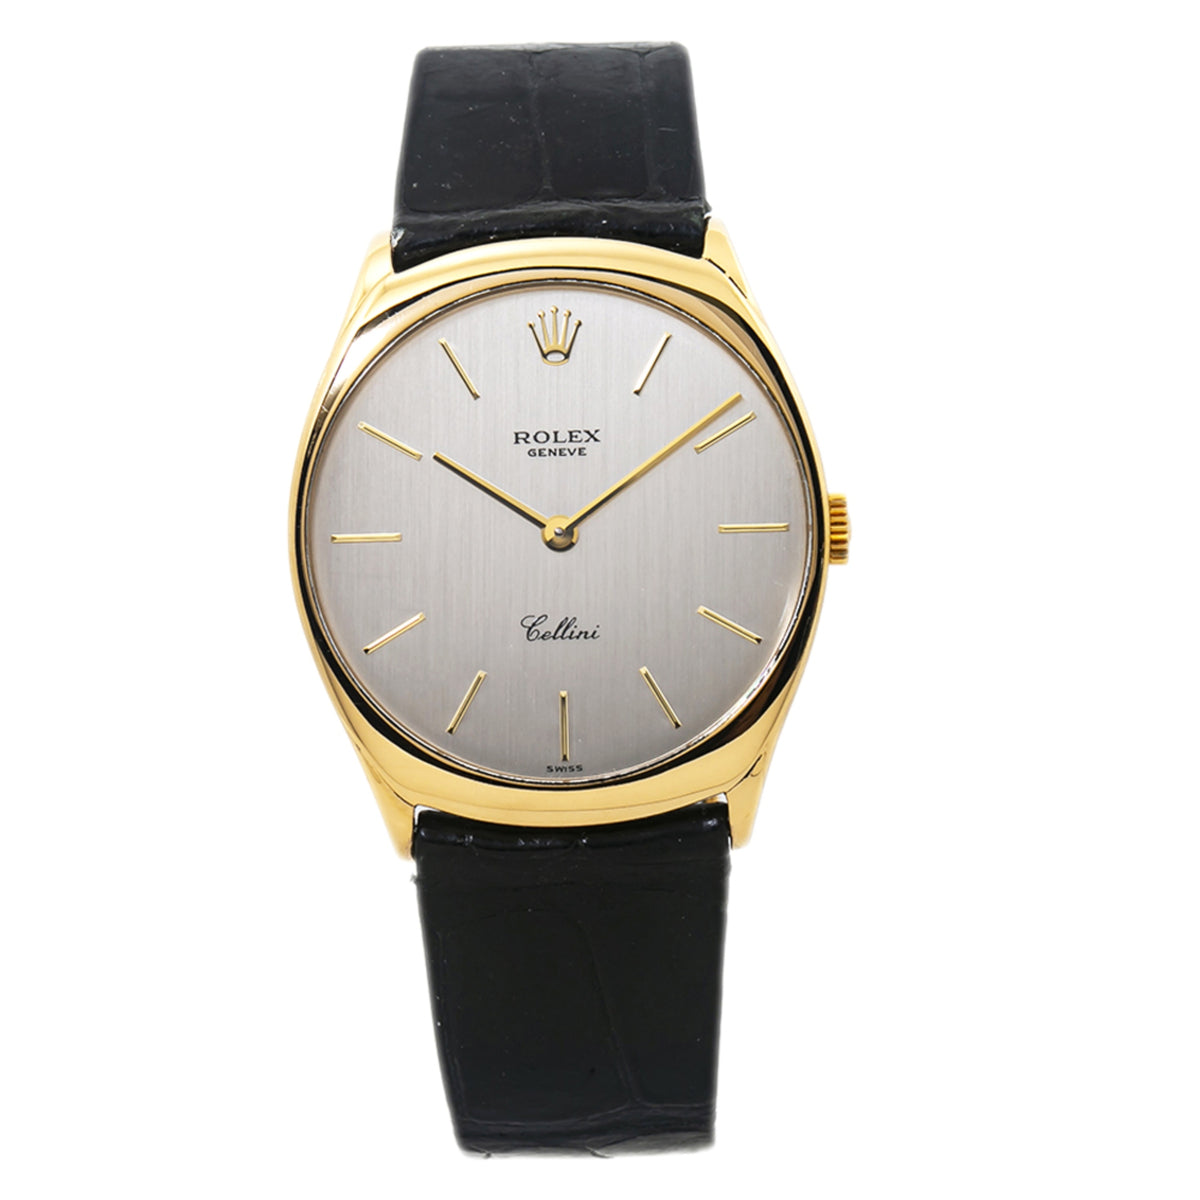 Rolex Cellini 4133 18k Yellow Gold Men's Hand Wind Watch Silver Dial 31mm